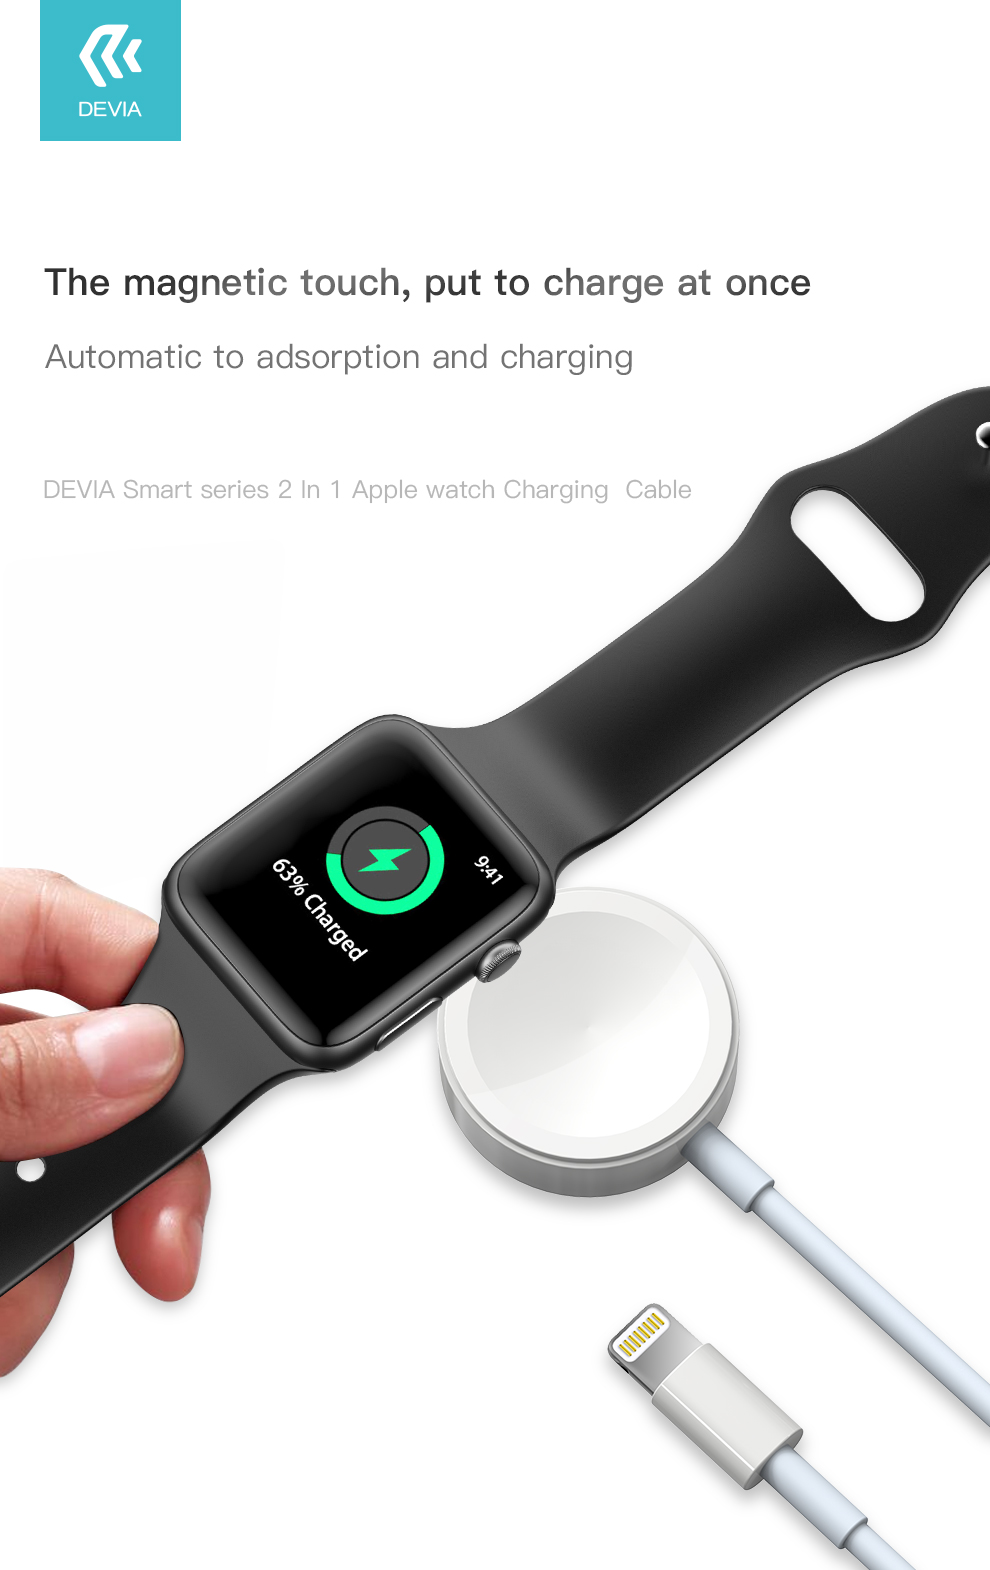 2 in 1 Apple Watch Charger - USB-A to Lightning